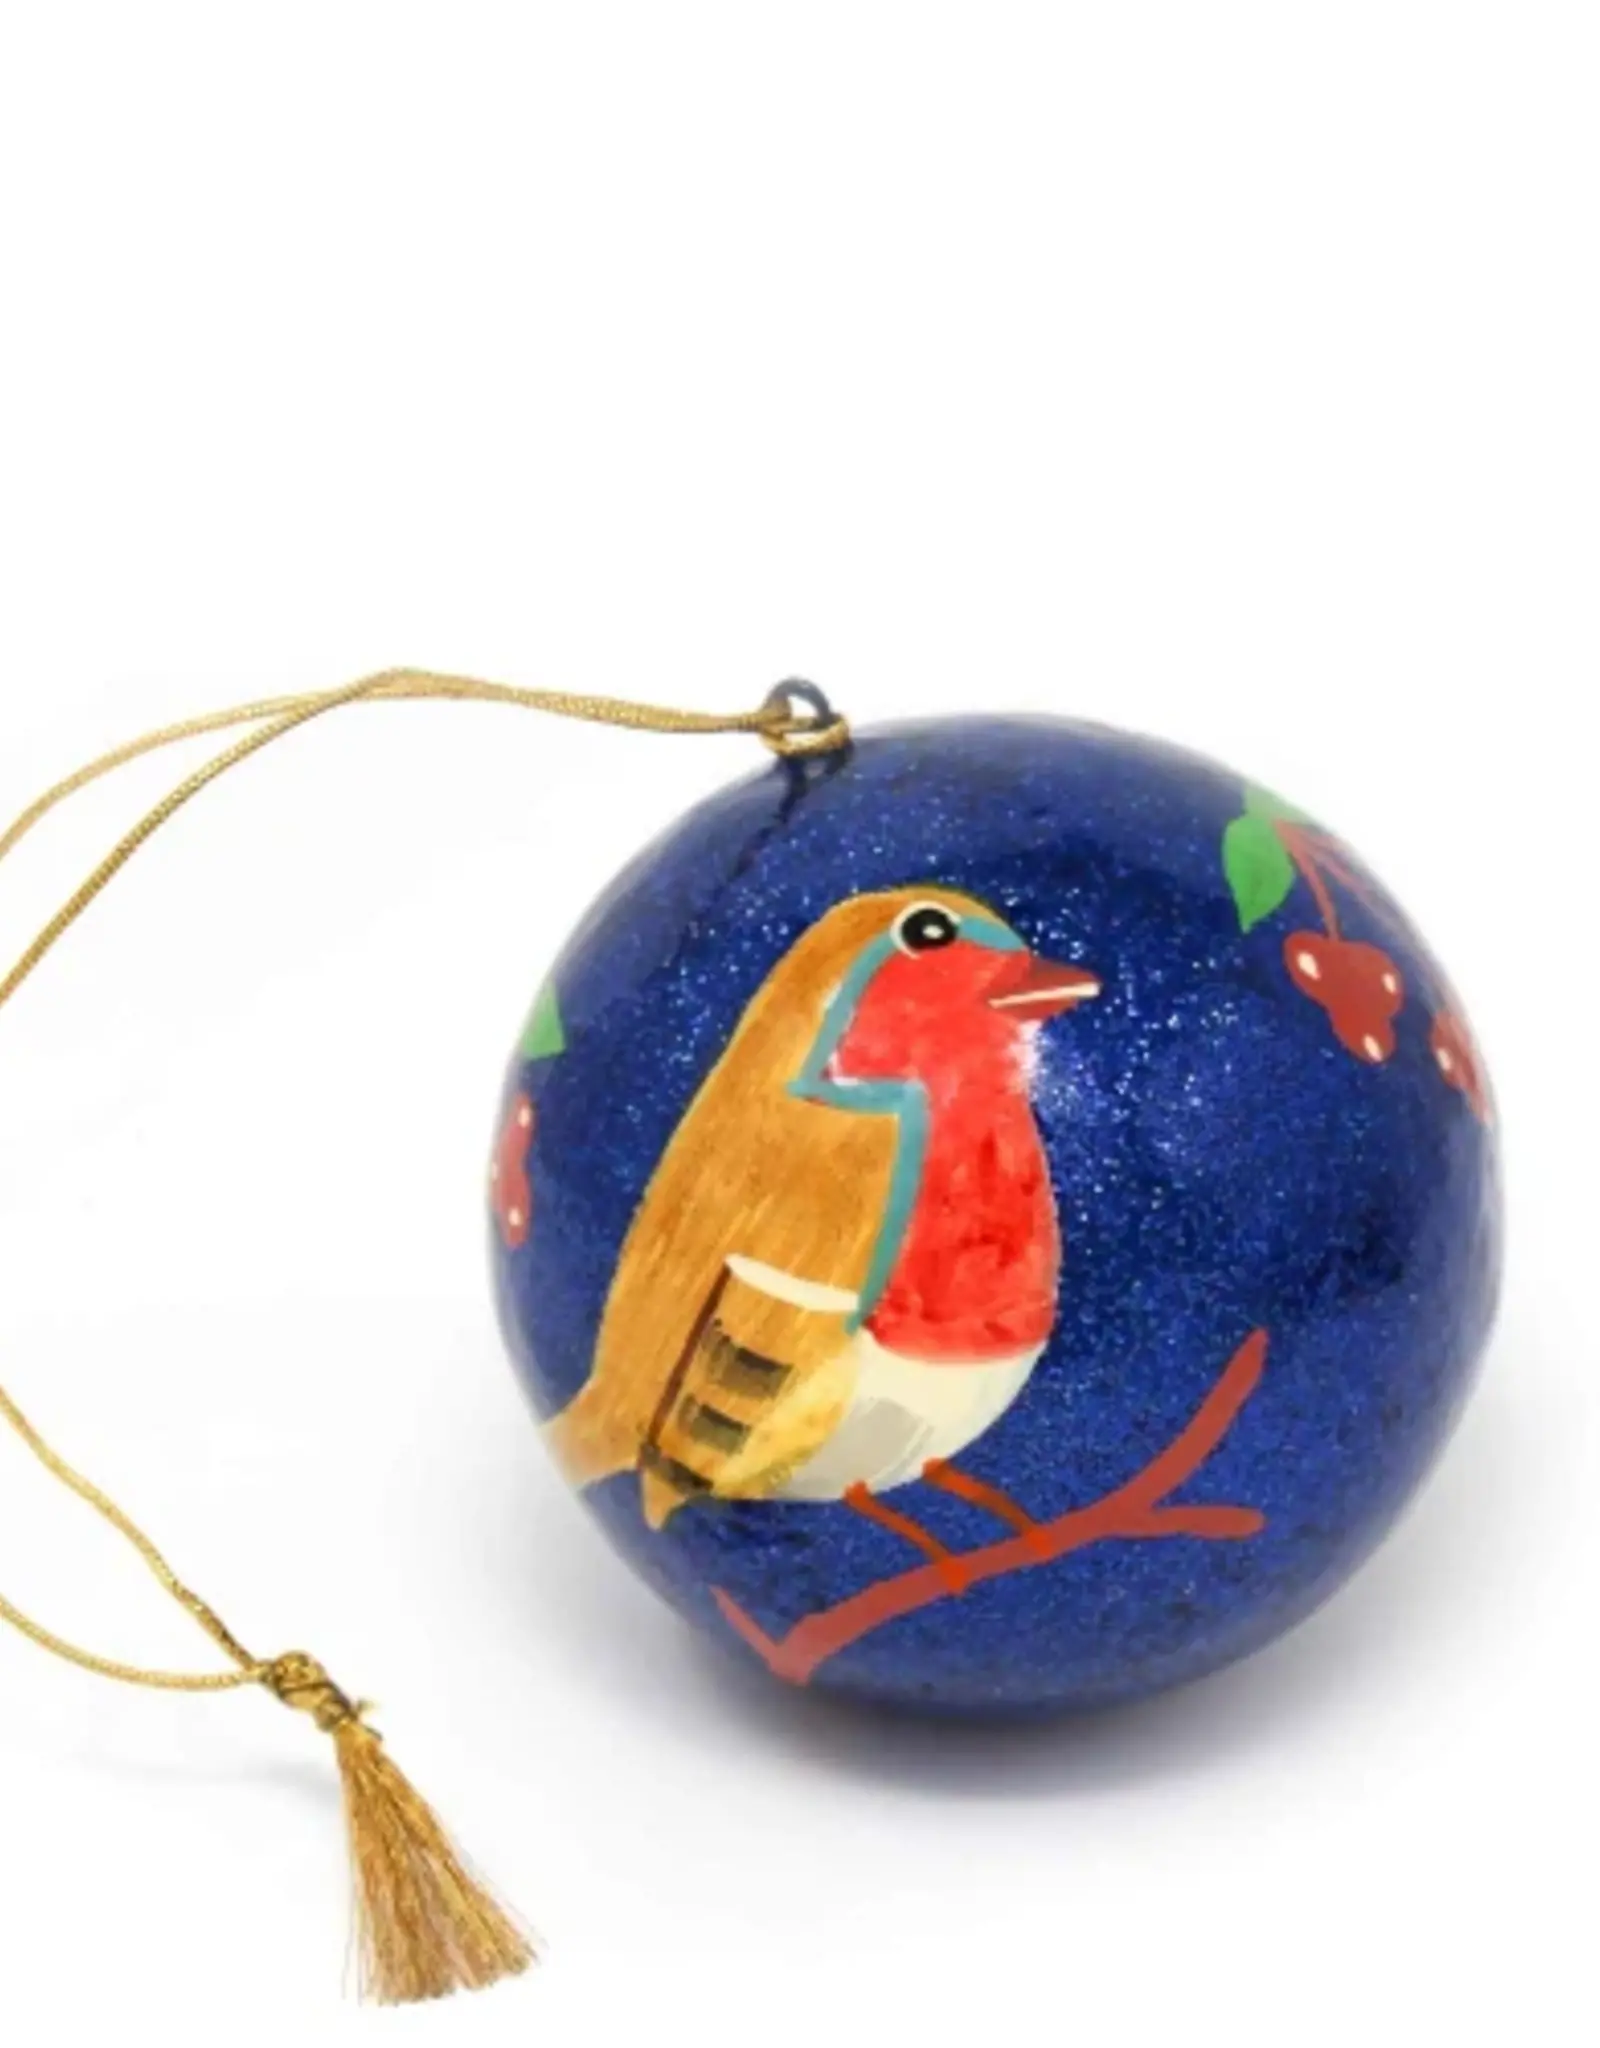 India Ornament Handpainted Bird on Branch - India